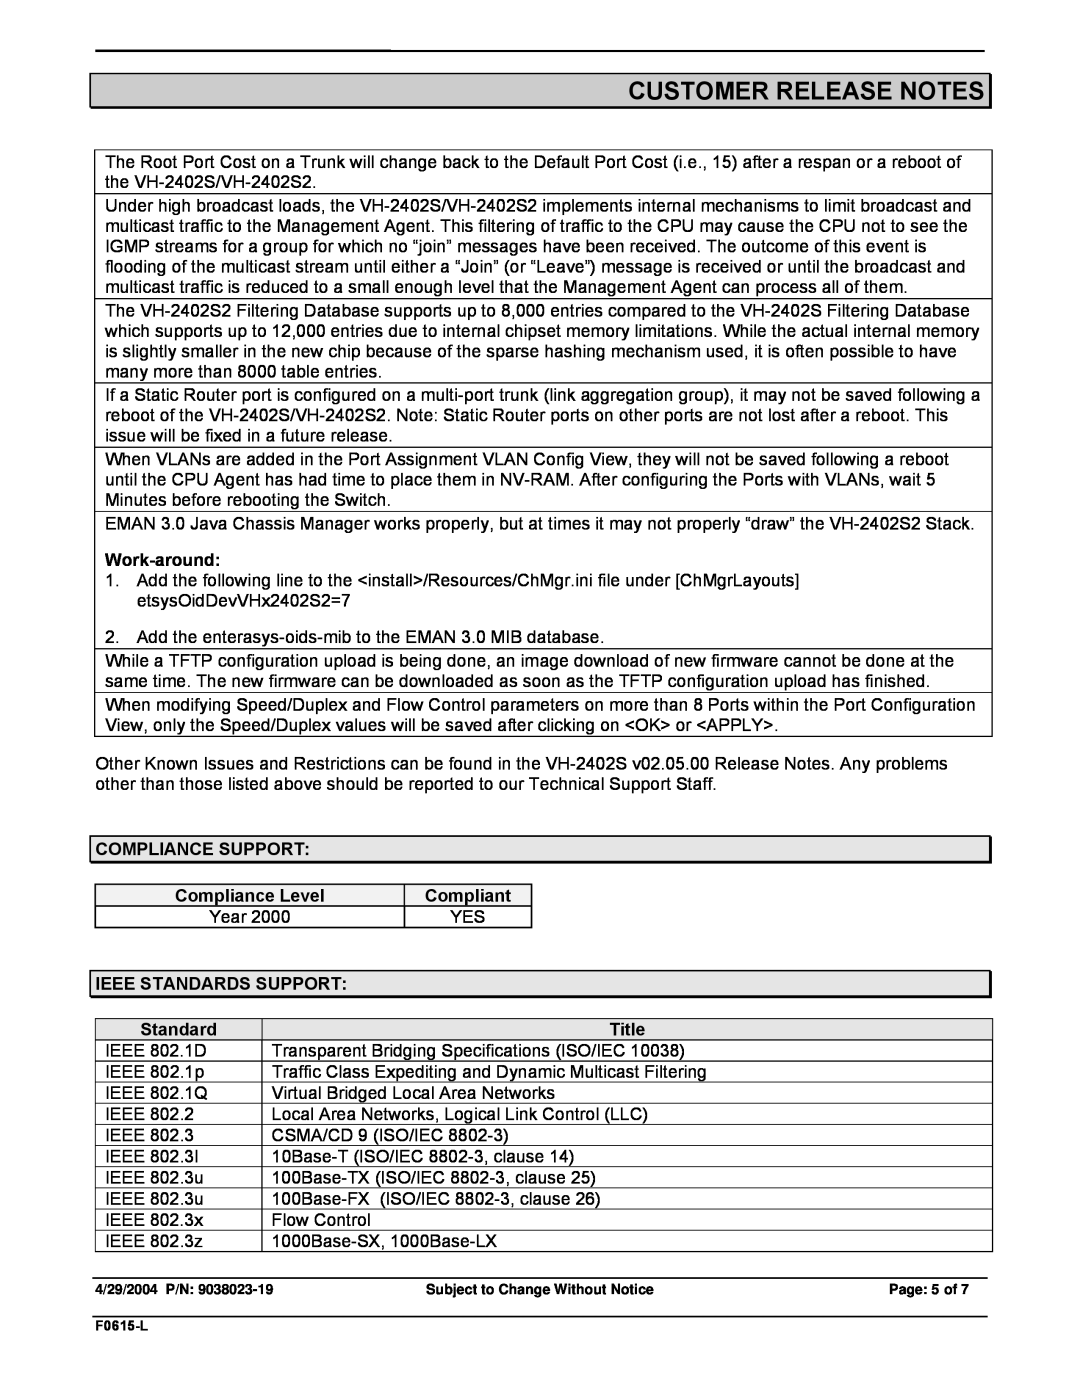 Enterasys Networks VH-2402S2 Customer Release Notes, Work-around, Compliance Support, Compliance Level, Compliant, Title 